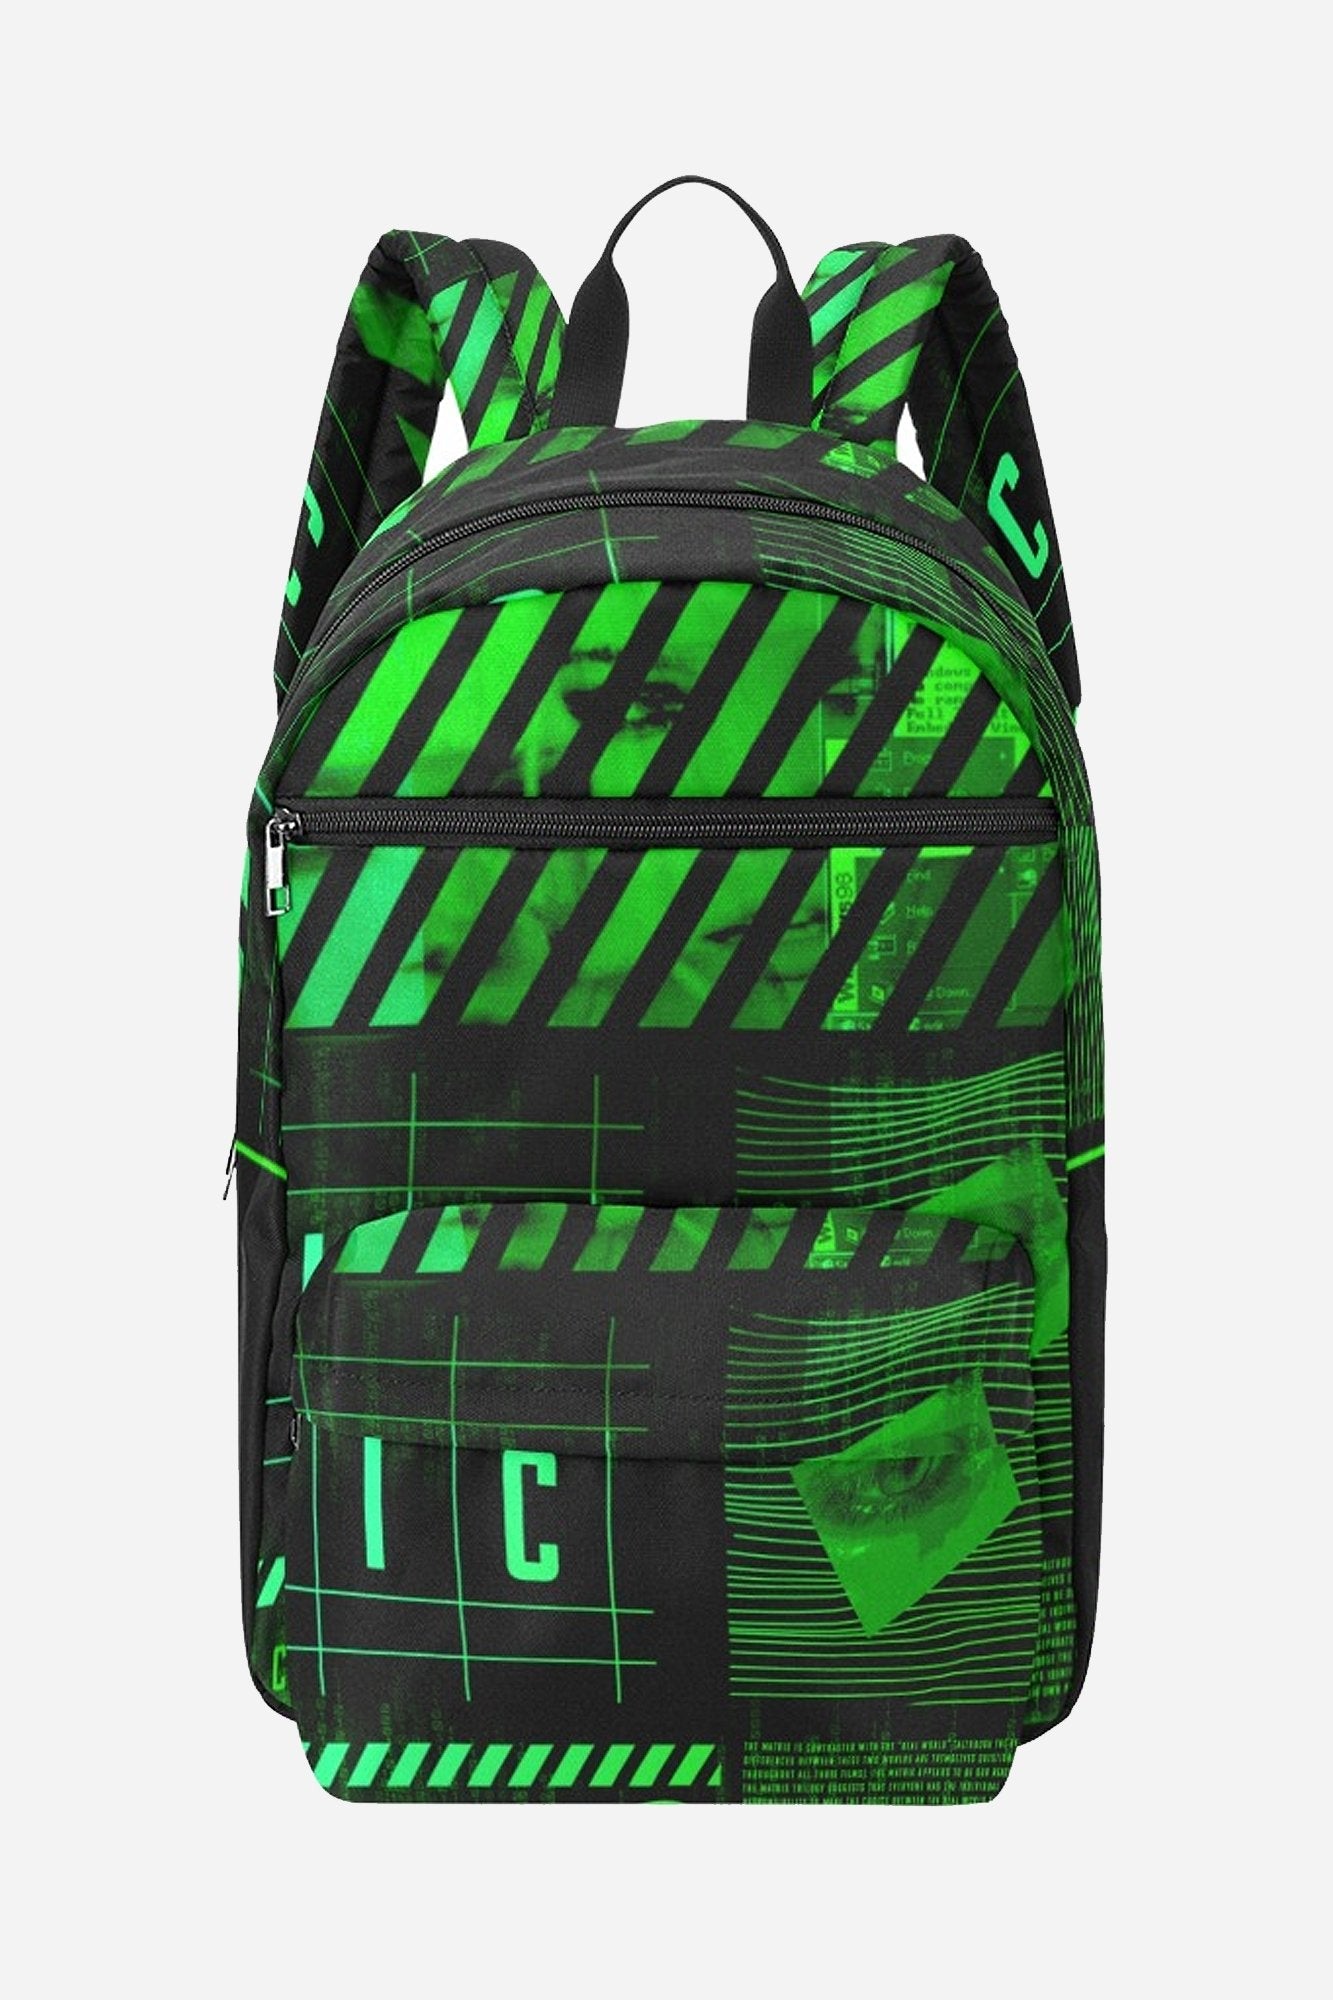 Living In The Matrix Backpack - In Control Clothing